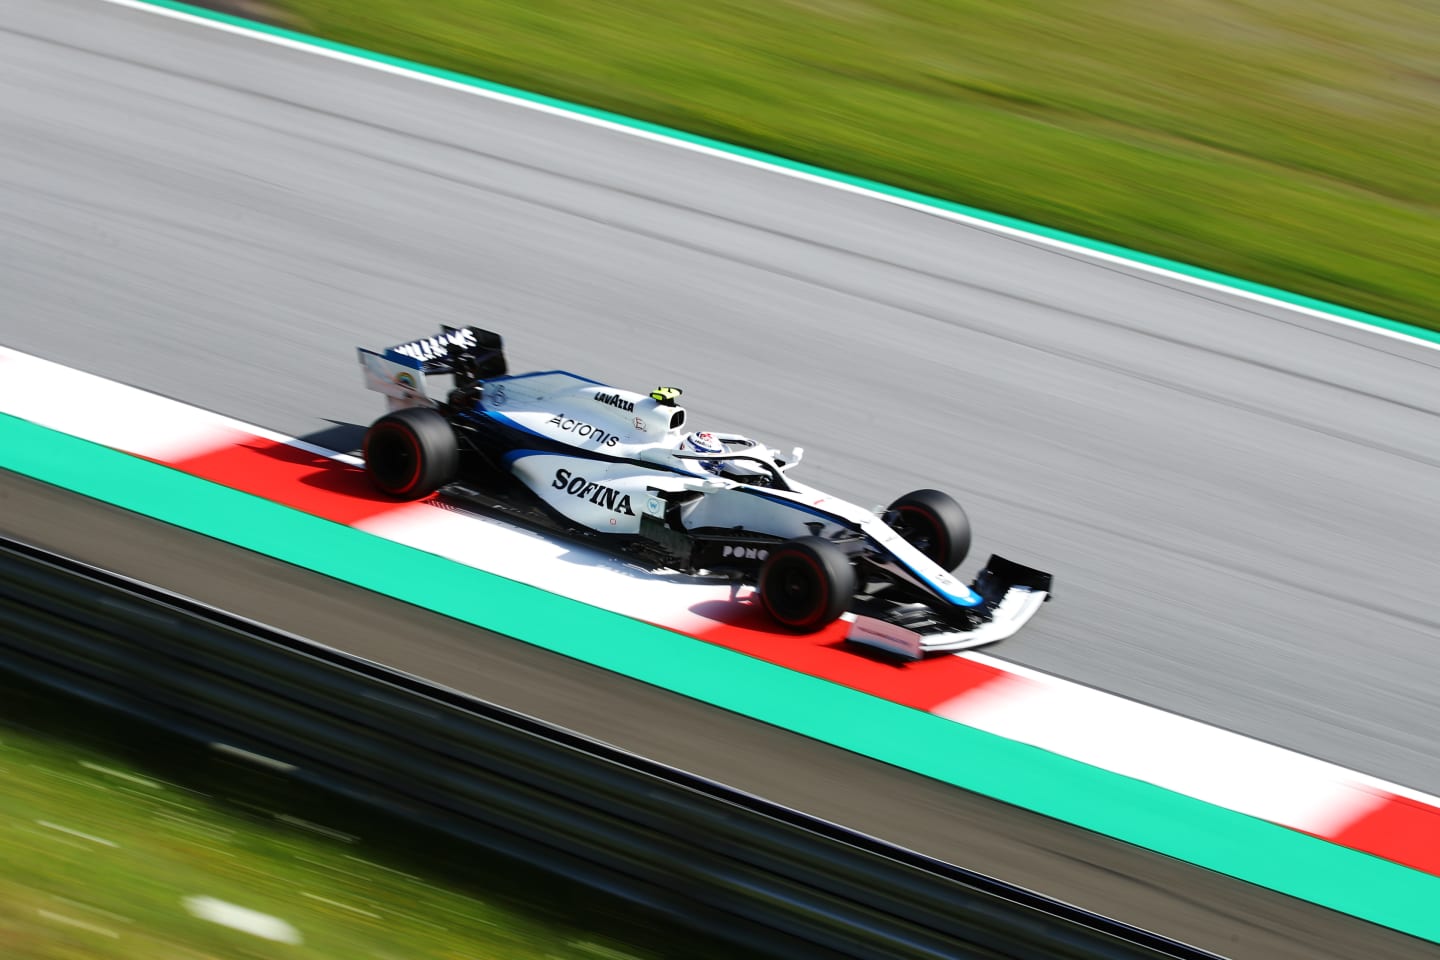 SPIELBERG, AUSTRIA - JULY 10: Nicholas Latifi of Canada driving the (6) Williams Racing FW43 Mercedes on track during practice for the F1 Grand Prix of Styria at Red Bull Ring on July 10, 2020 in Spielberg, Austria. (Photo by Bryn Lennon/Getty Images)